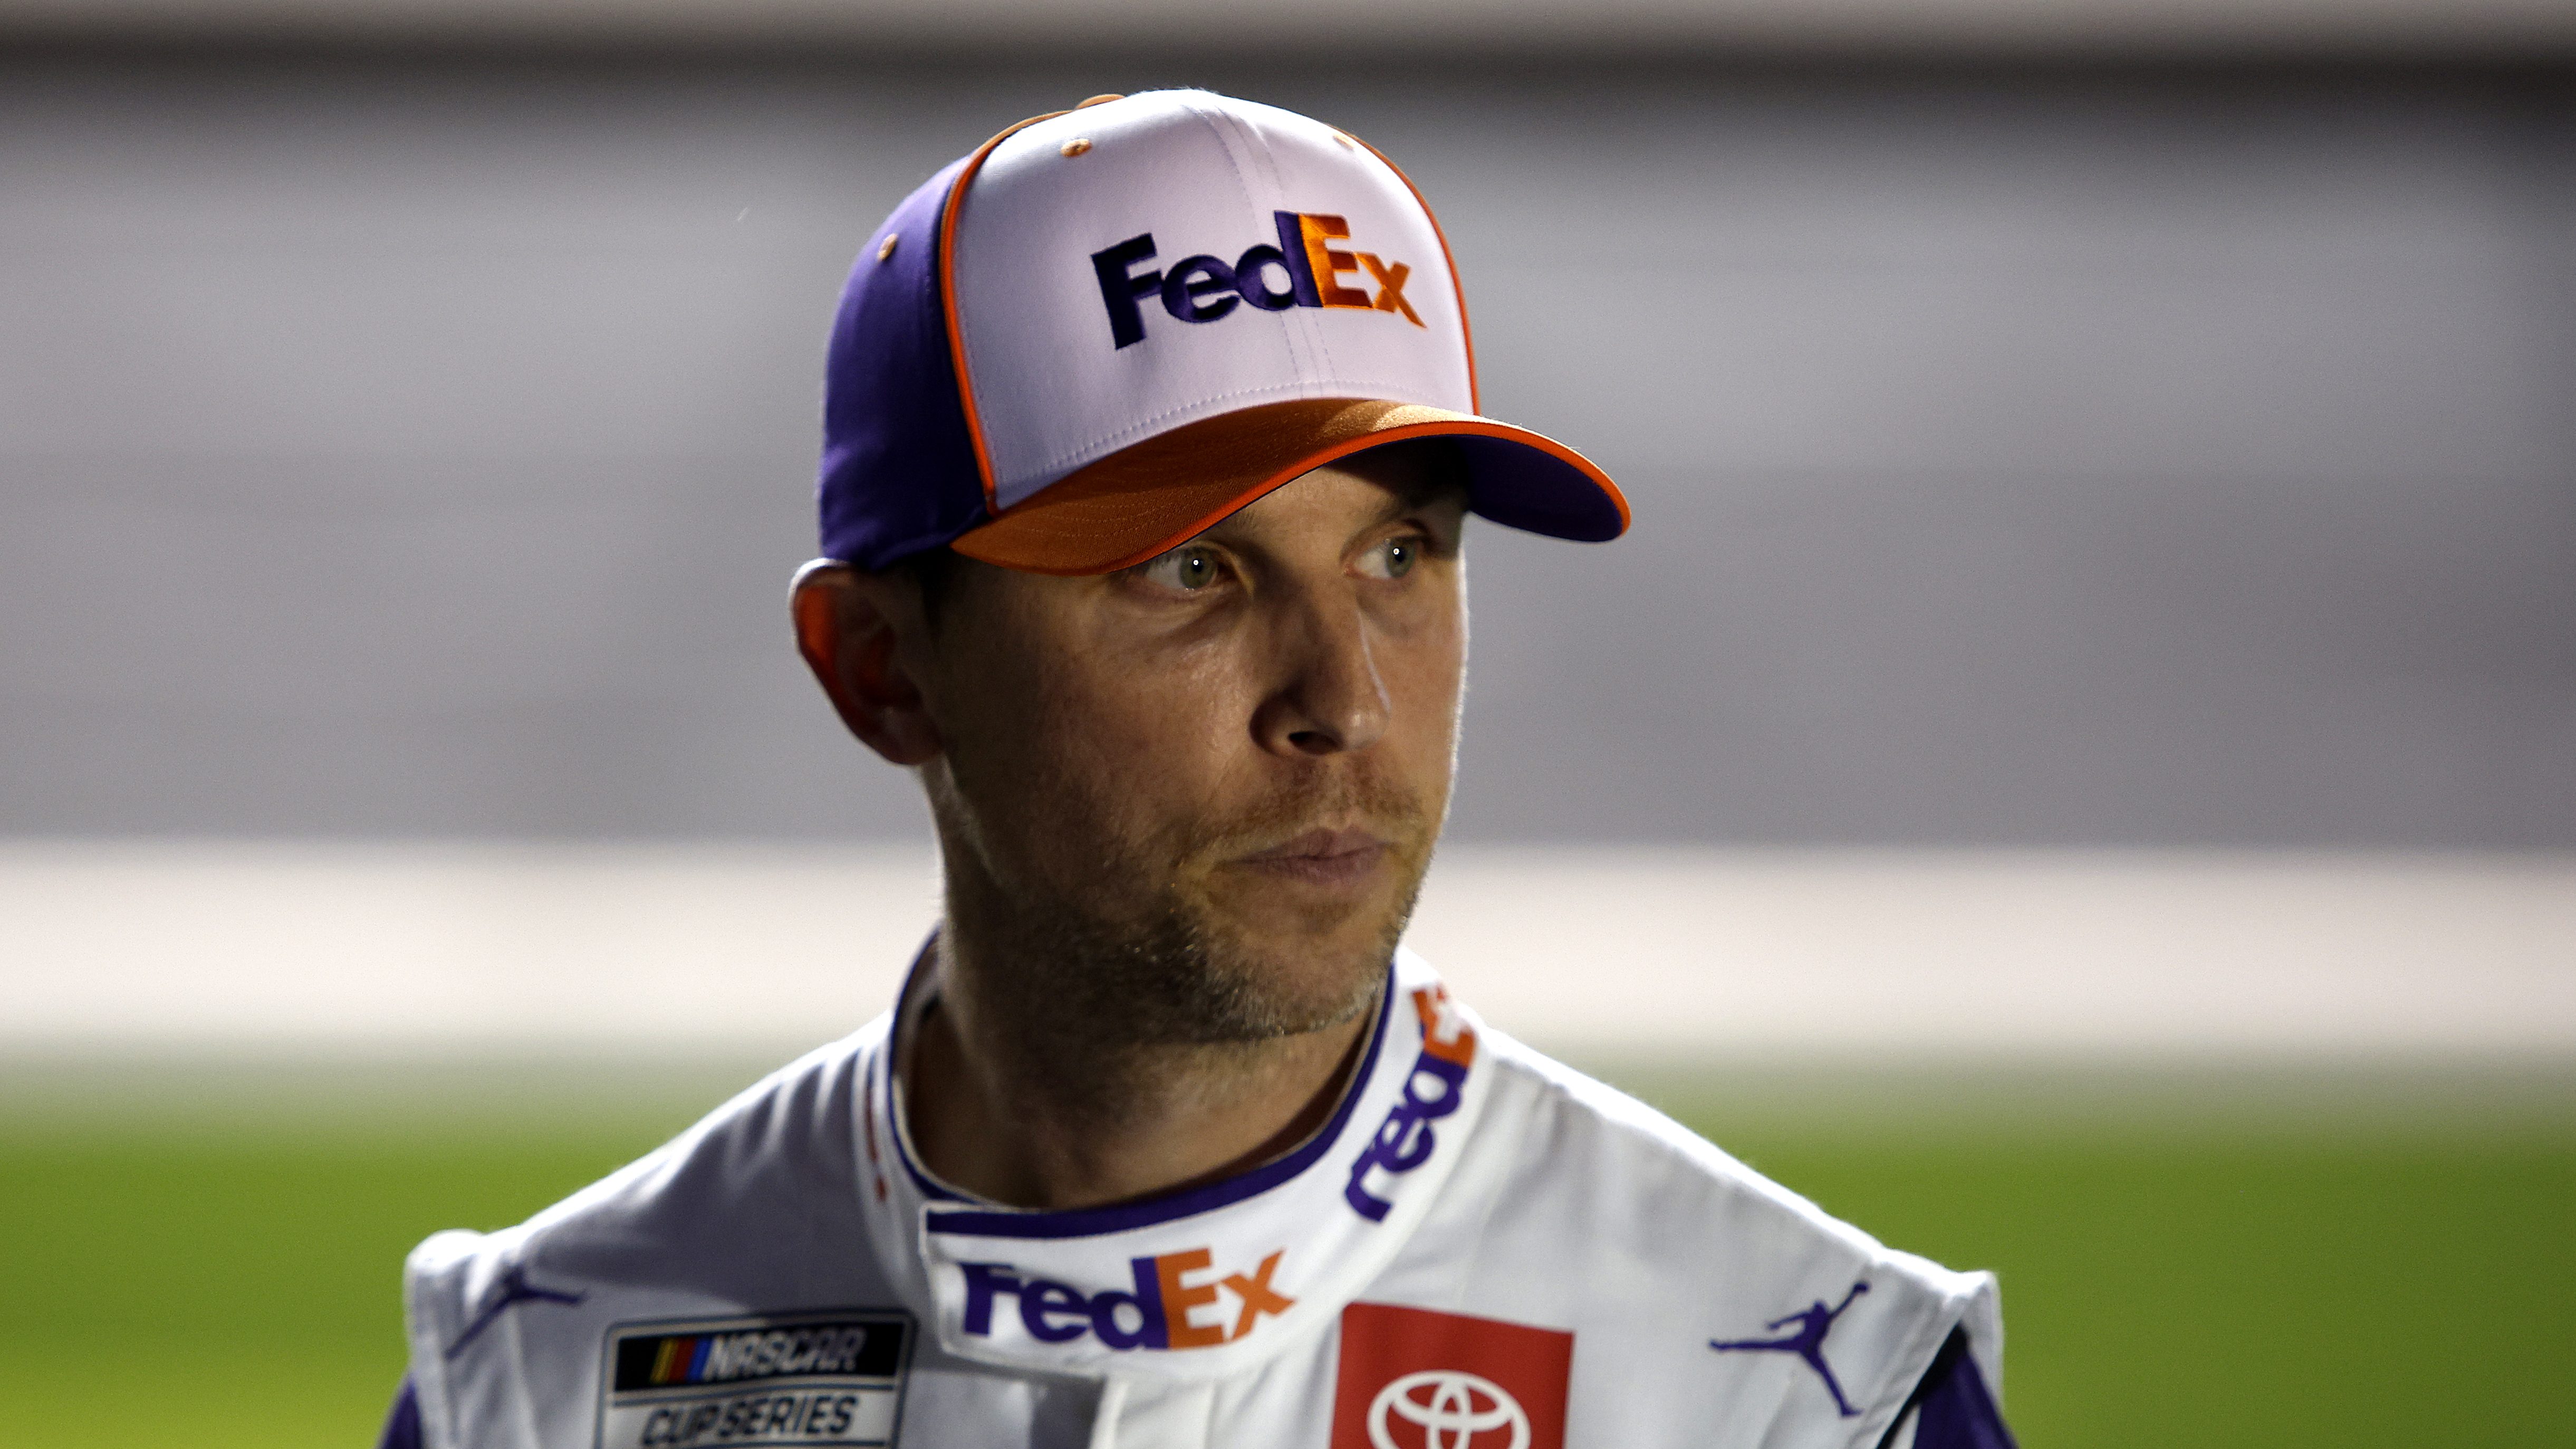 Denny Hamlin Channels Michael Jordan in His Outfit Choice